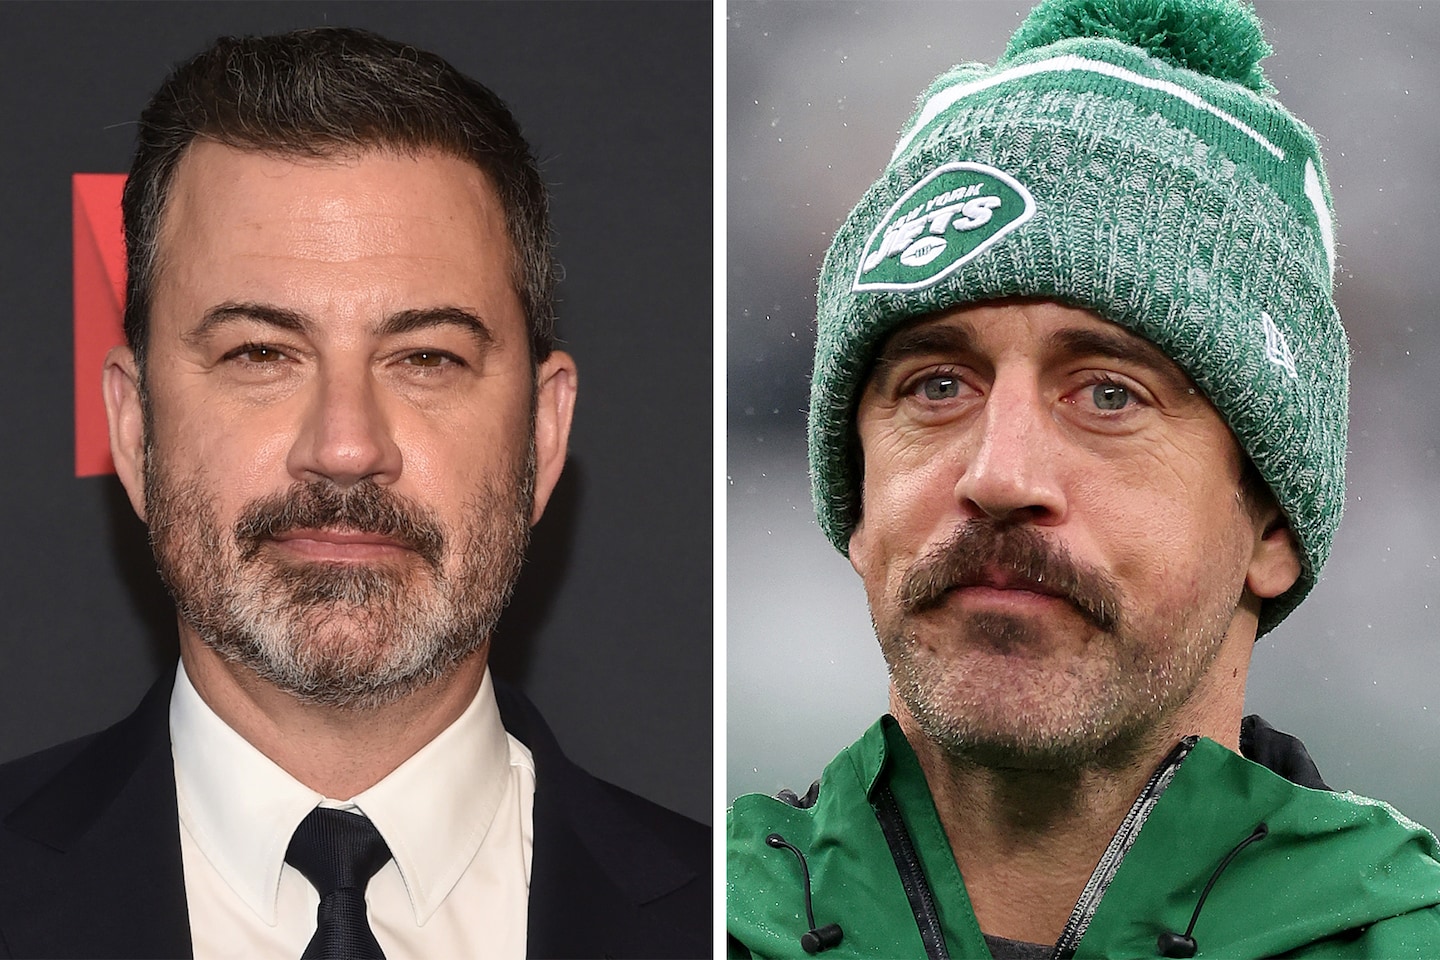 Aaron Rodgers, back on ESPN, responds but doesn’t apologize to Jimmy Kimmel